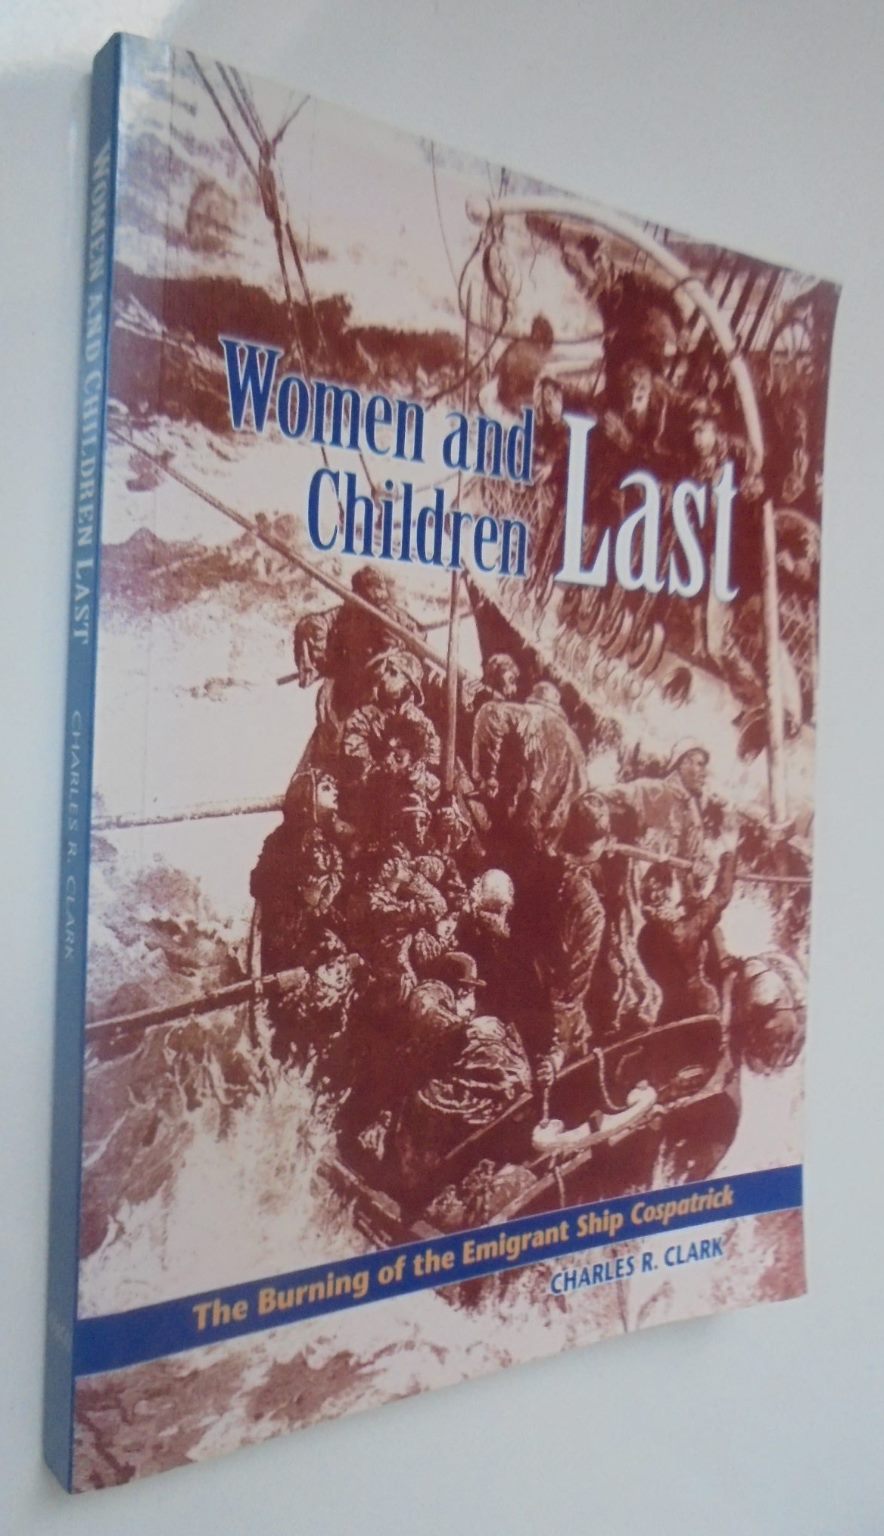 Women and Children Last The Burning of the Emigrant Ship Cospatrick By Dr. Charles Clark